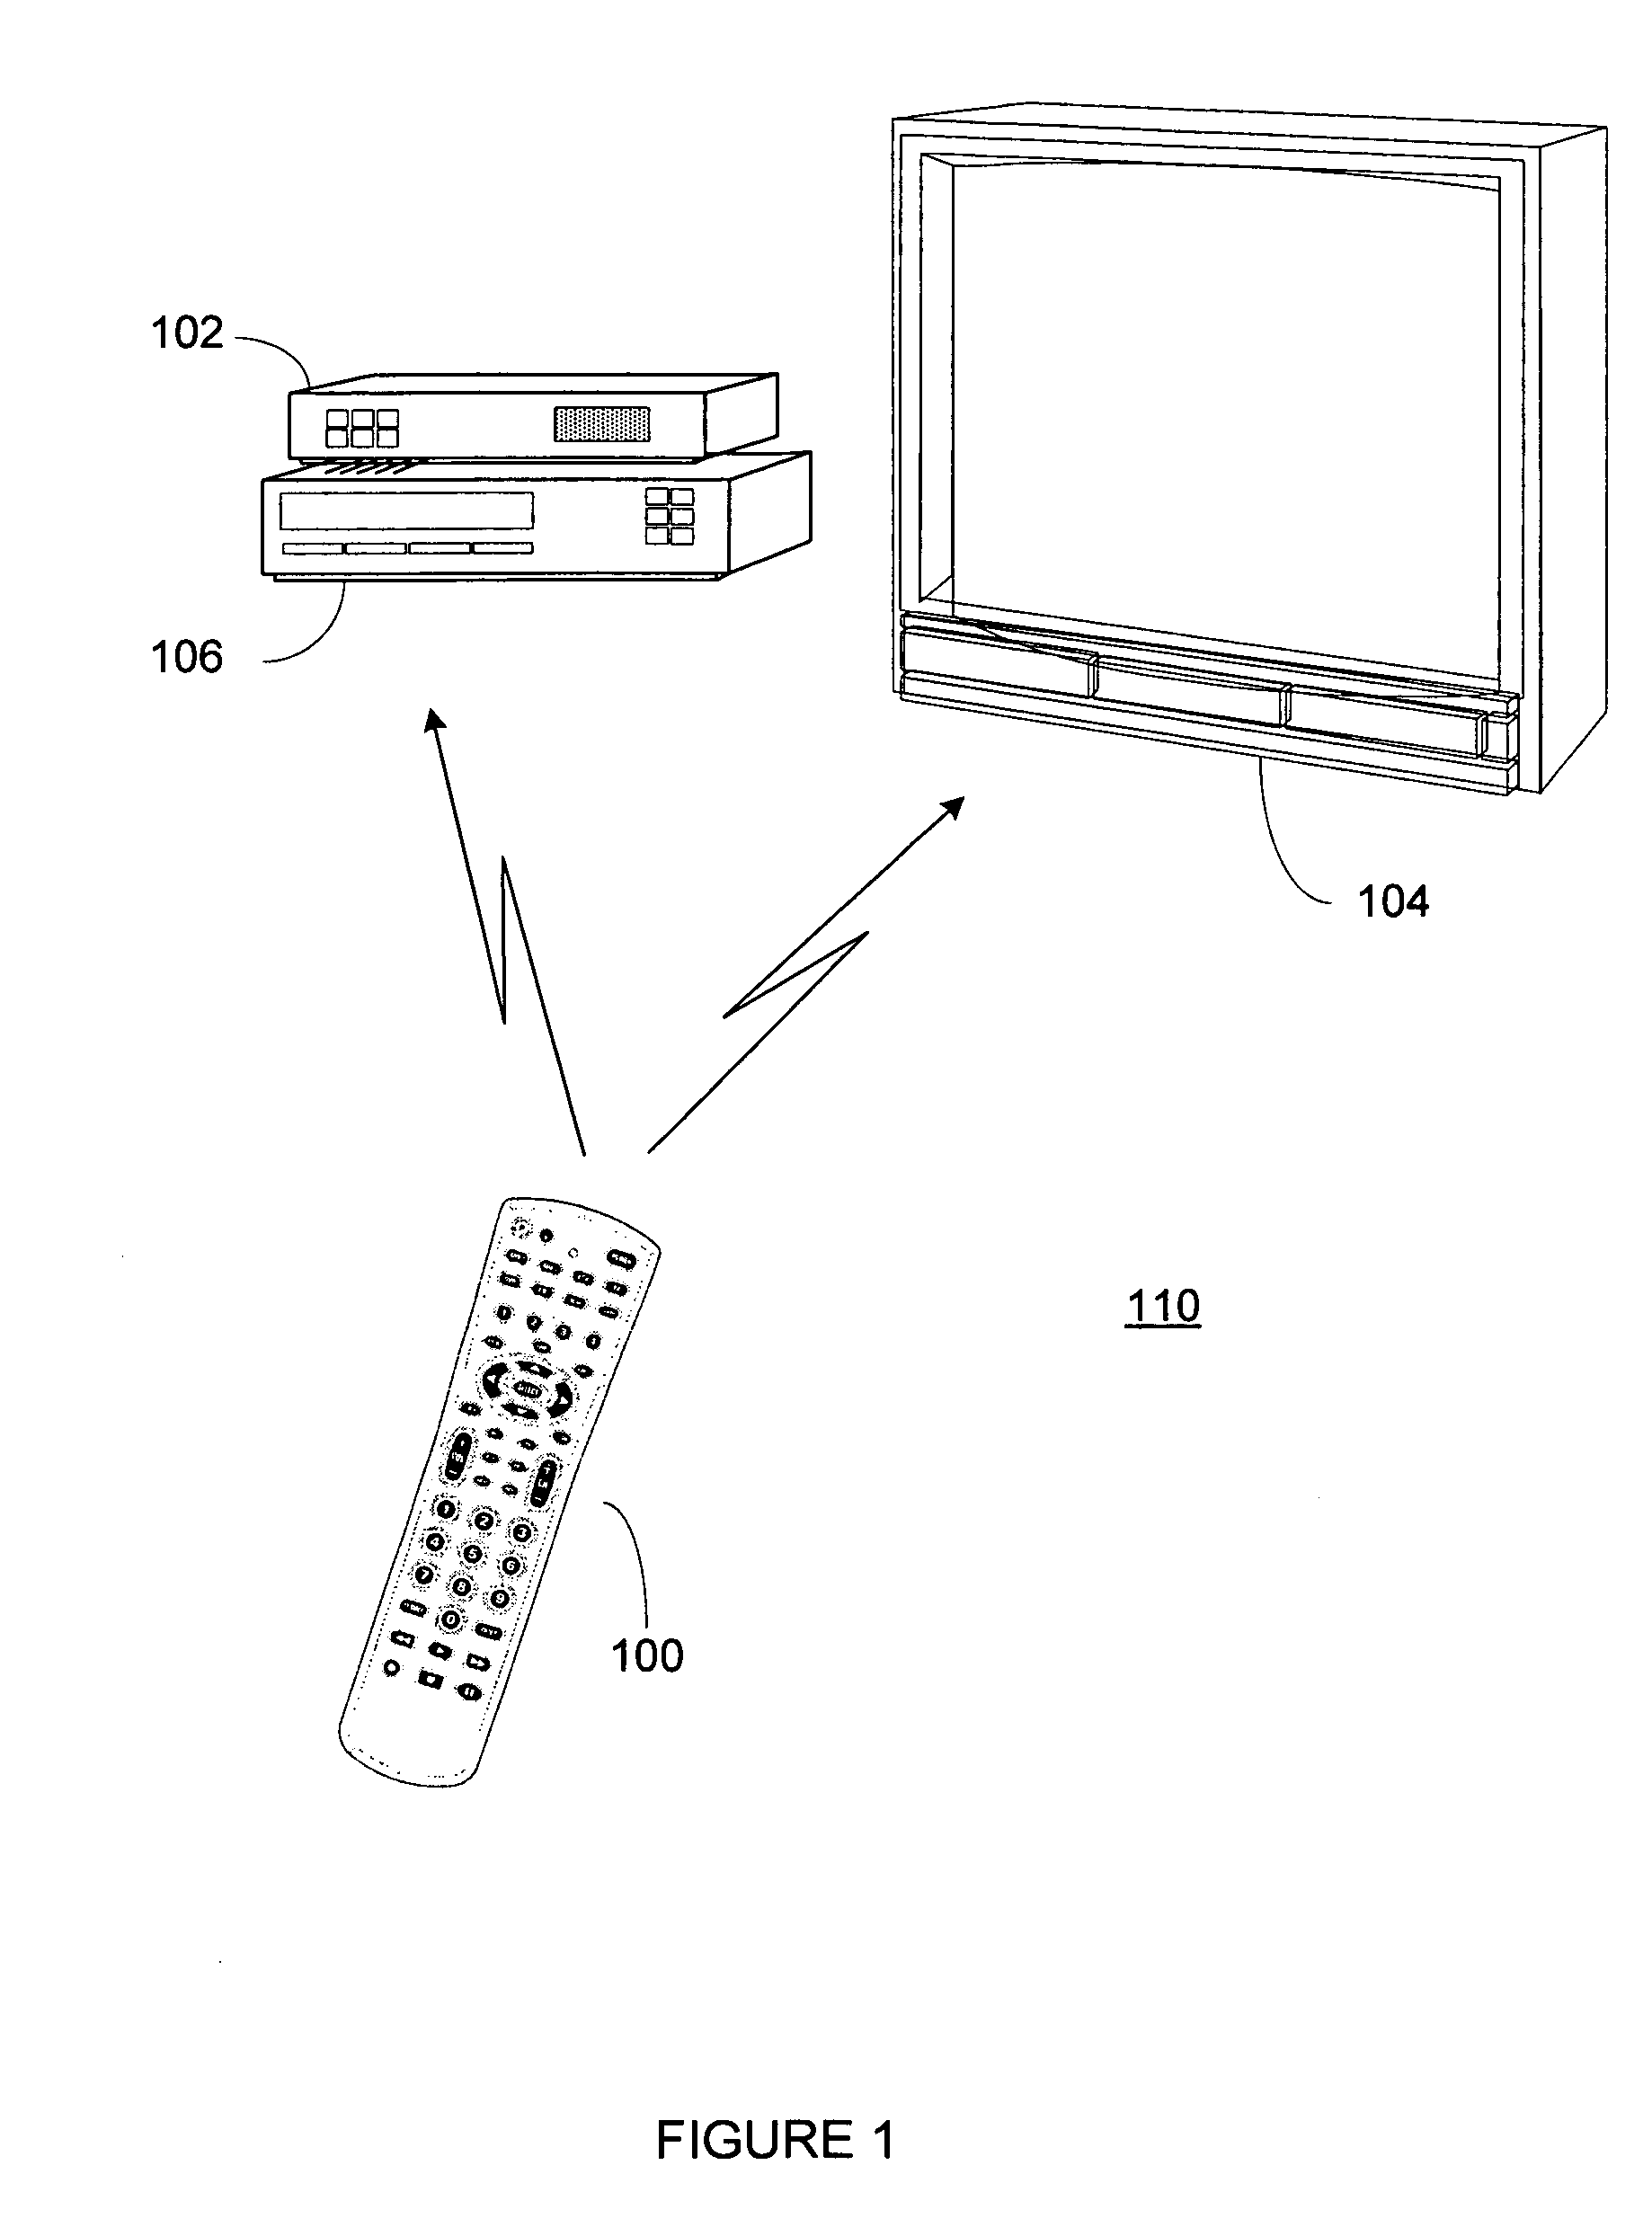 System and method for simplified setup of a universal remote control